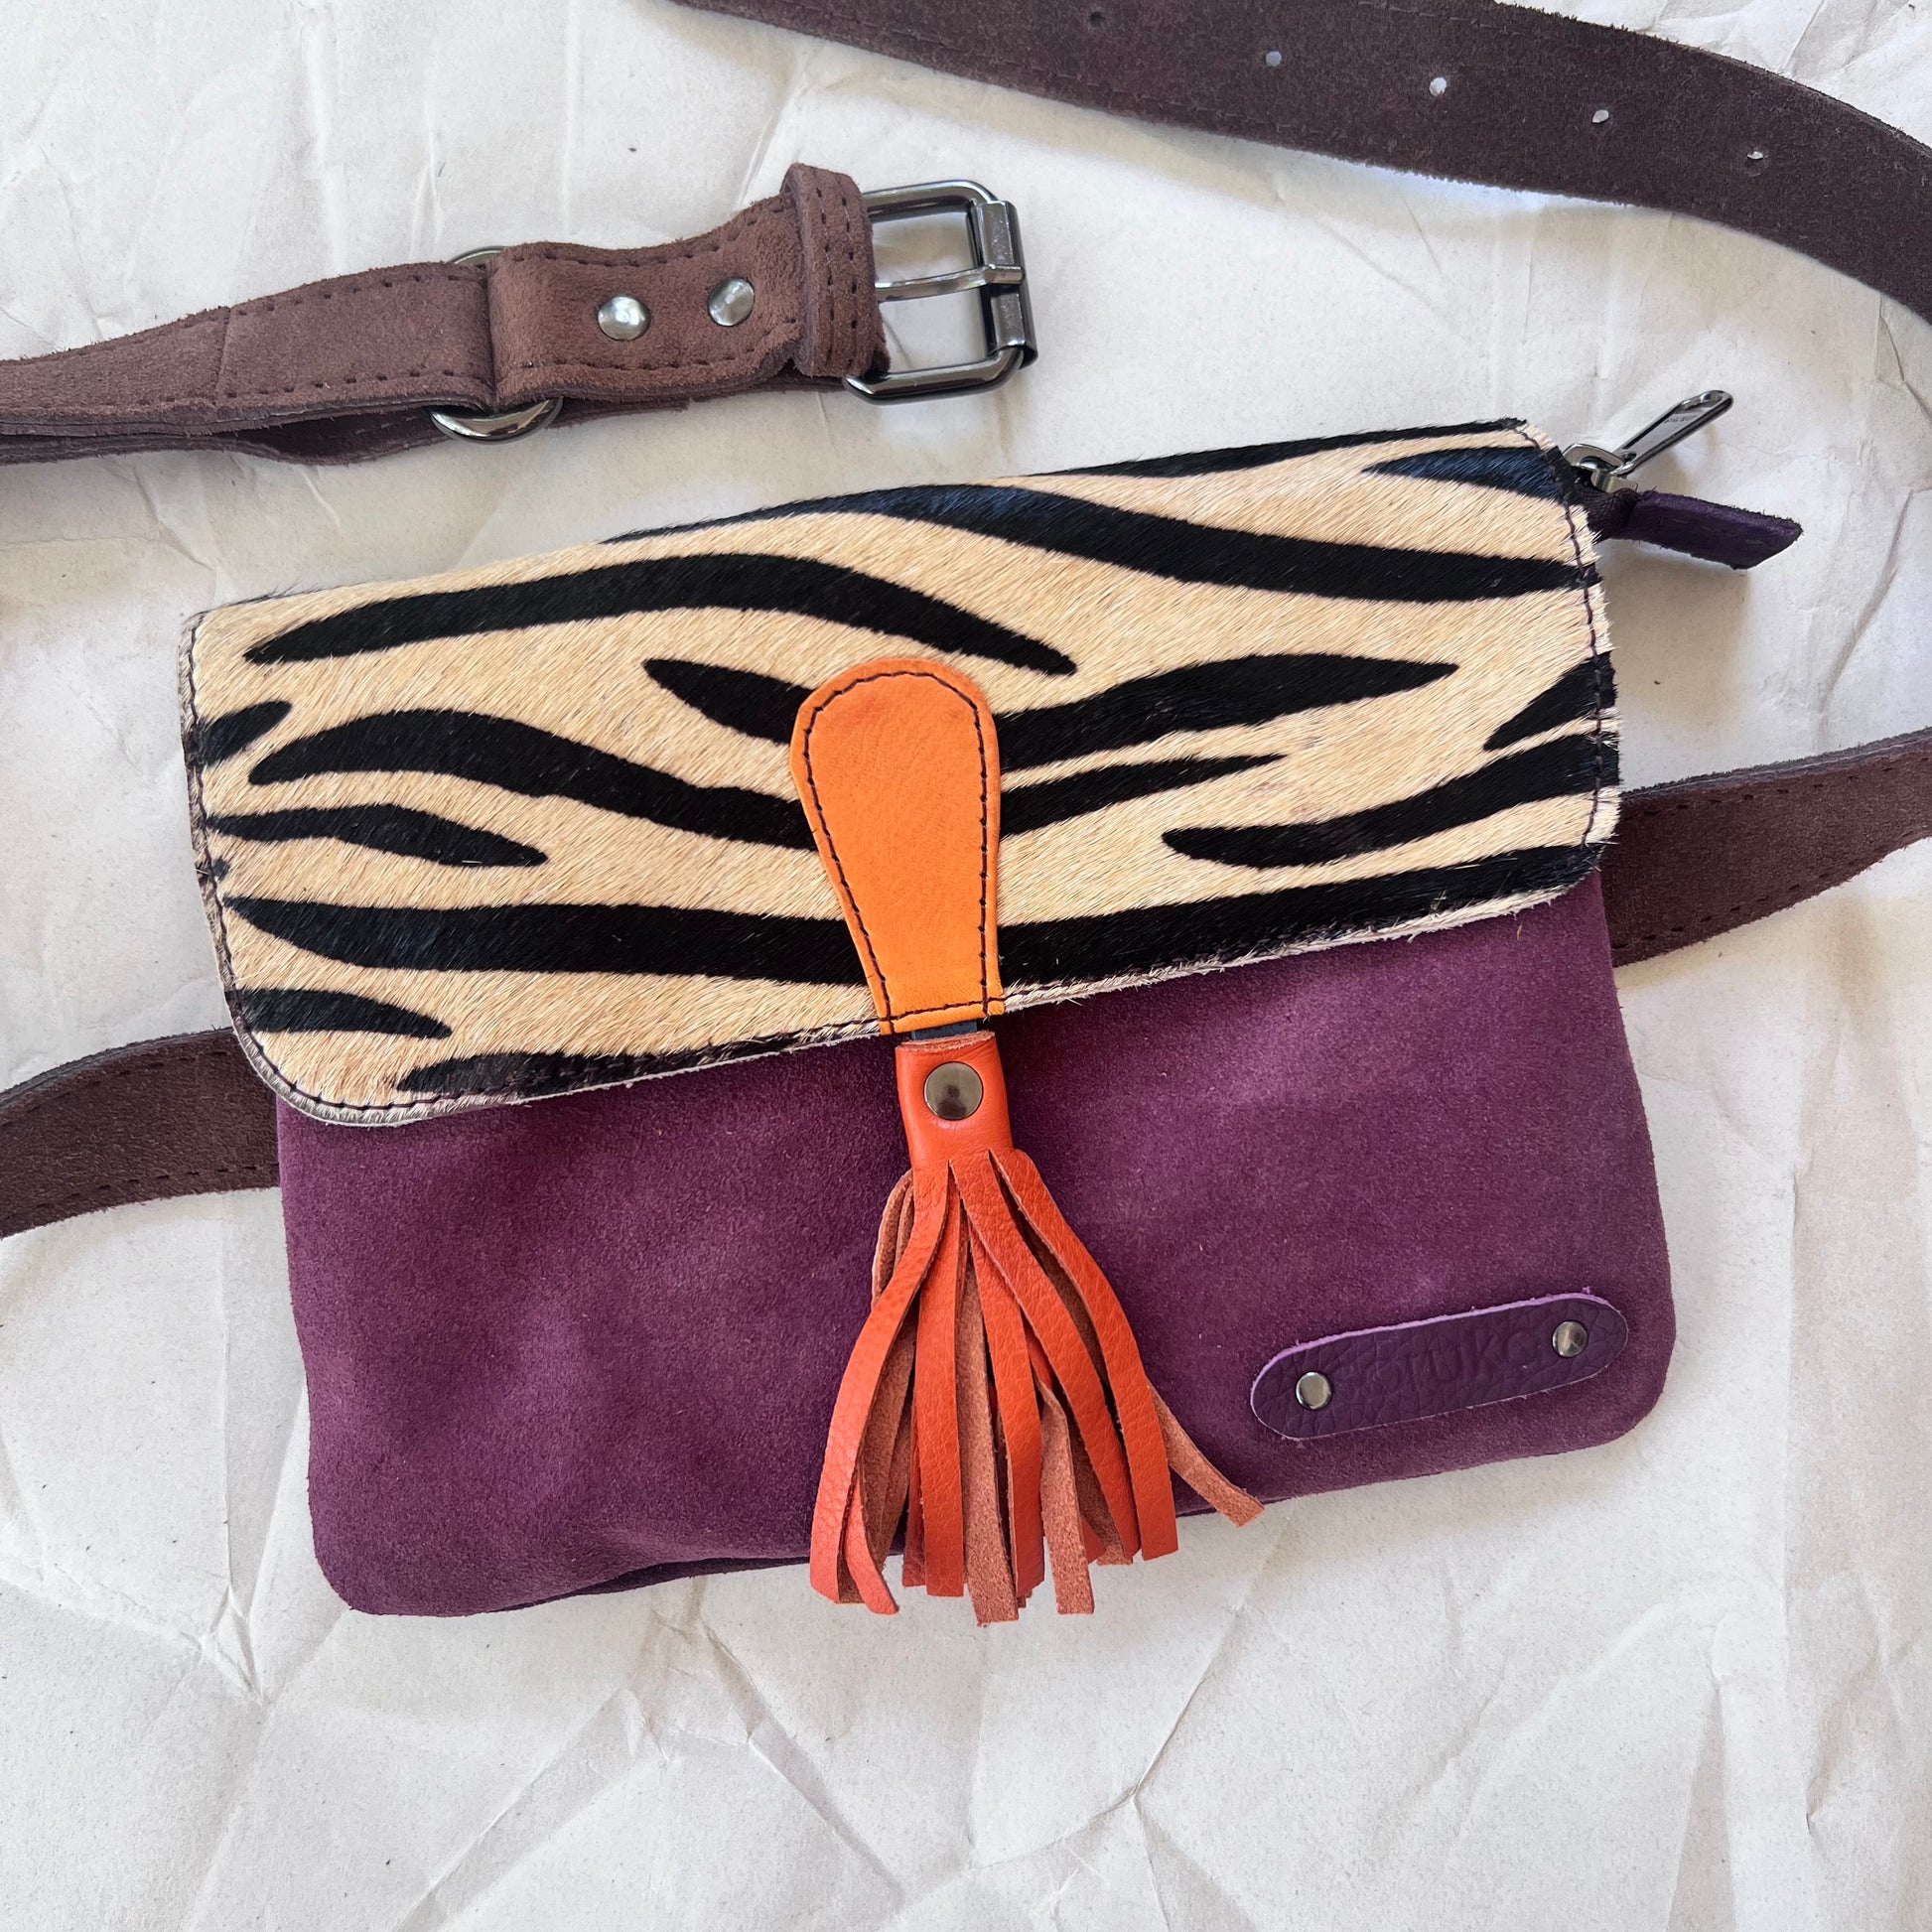 small square bag with purple suede body, black and white stripe animal print flap with orange tassel, and brown belt.